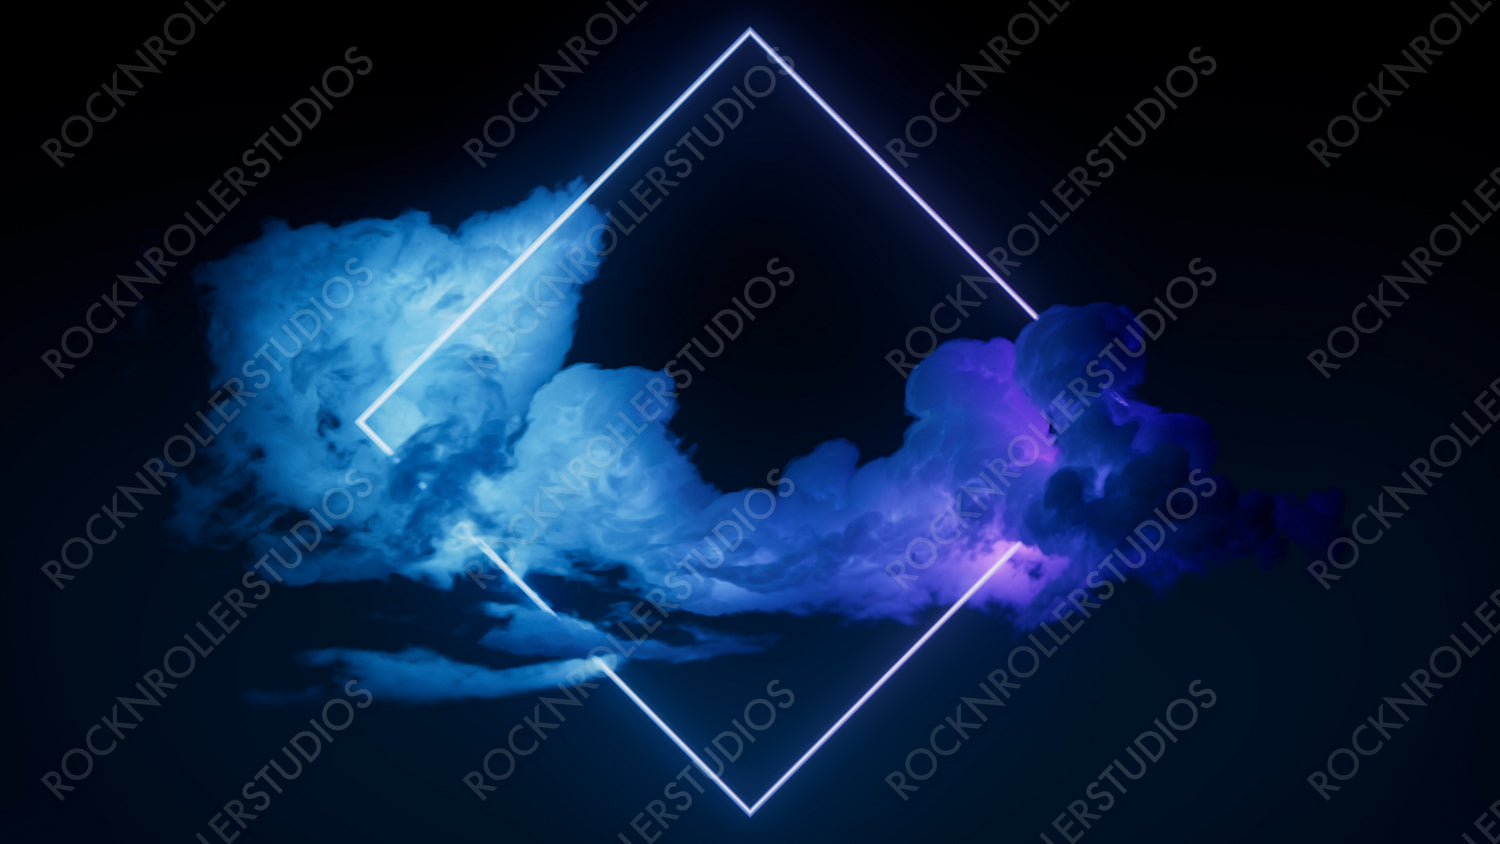 Blue and Purple Neon Light with Cloud Formation. Diamond shaped Fluorescent Frame in Dark Environment.